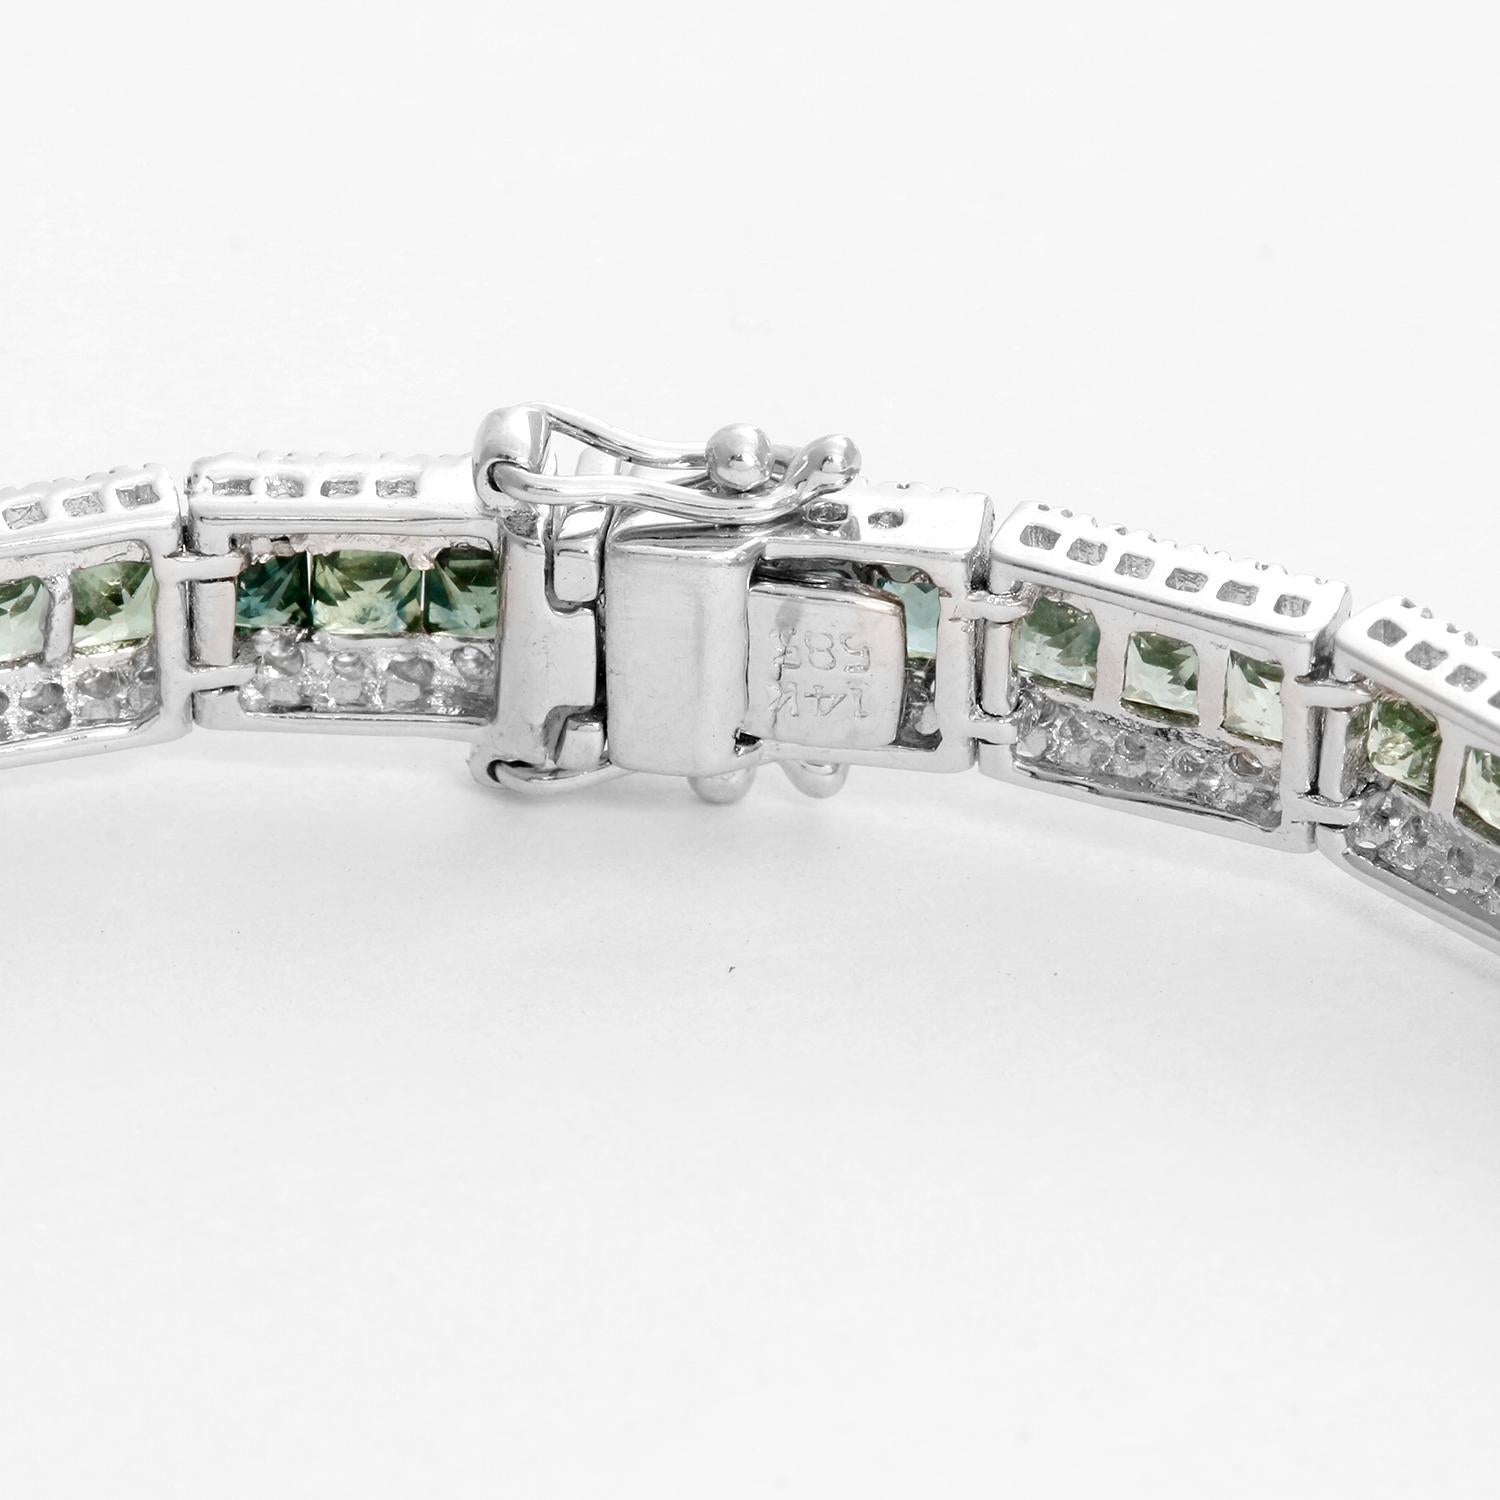 Multicolored Rainbow Sapphire & Diamond Bracelet - 14K White gold with gradient multicolored sapphires weighing 7.05 cts. with two rows of diamonds weighing 1.58 cts. Total weight 14.1 grams. Writs size up to a 7.5 inch wrist. This charming tennis